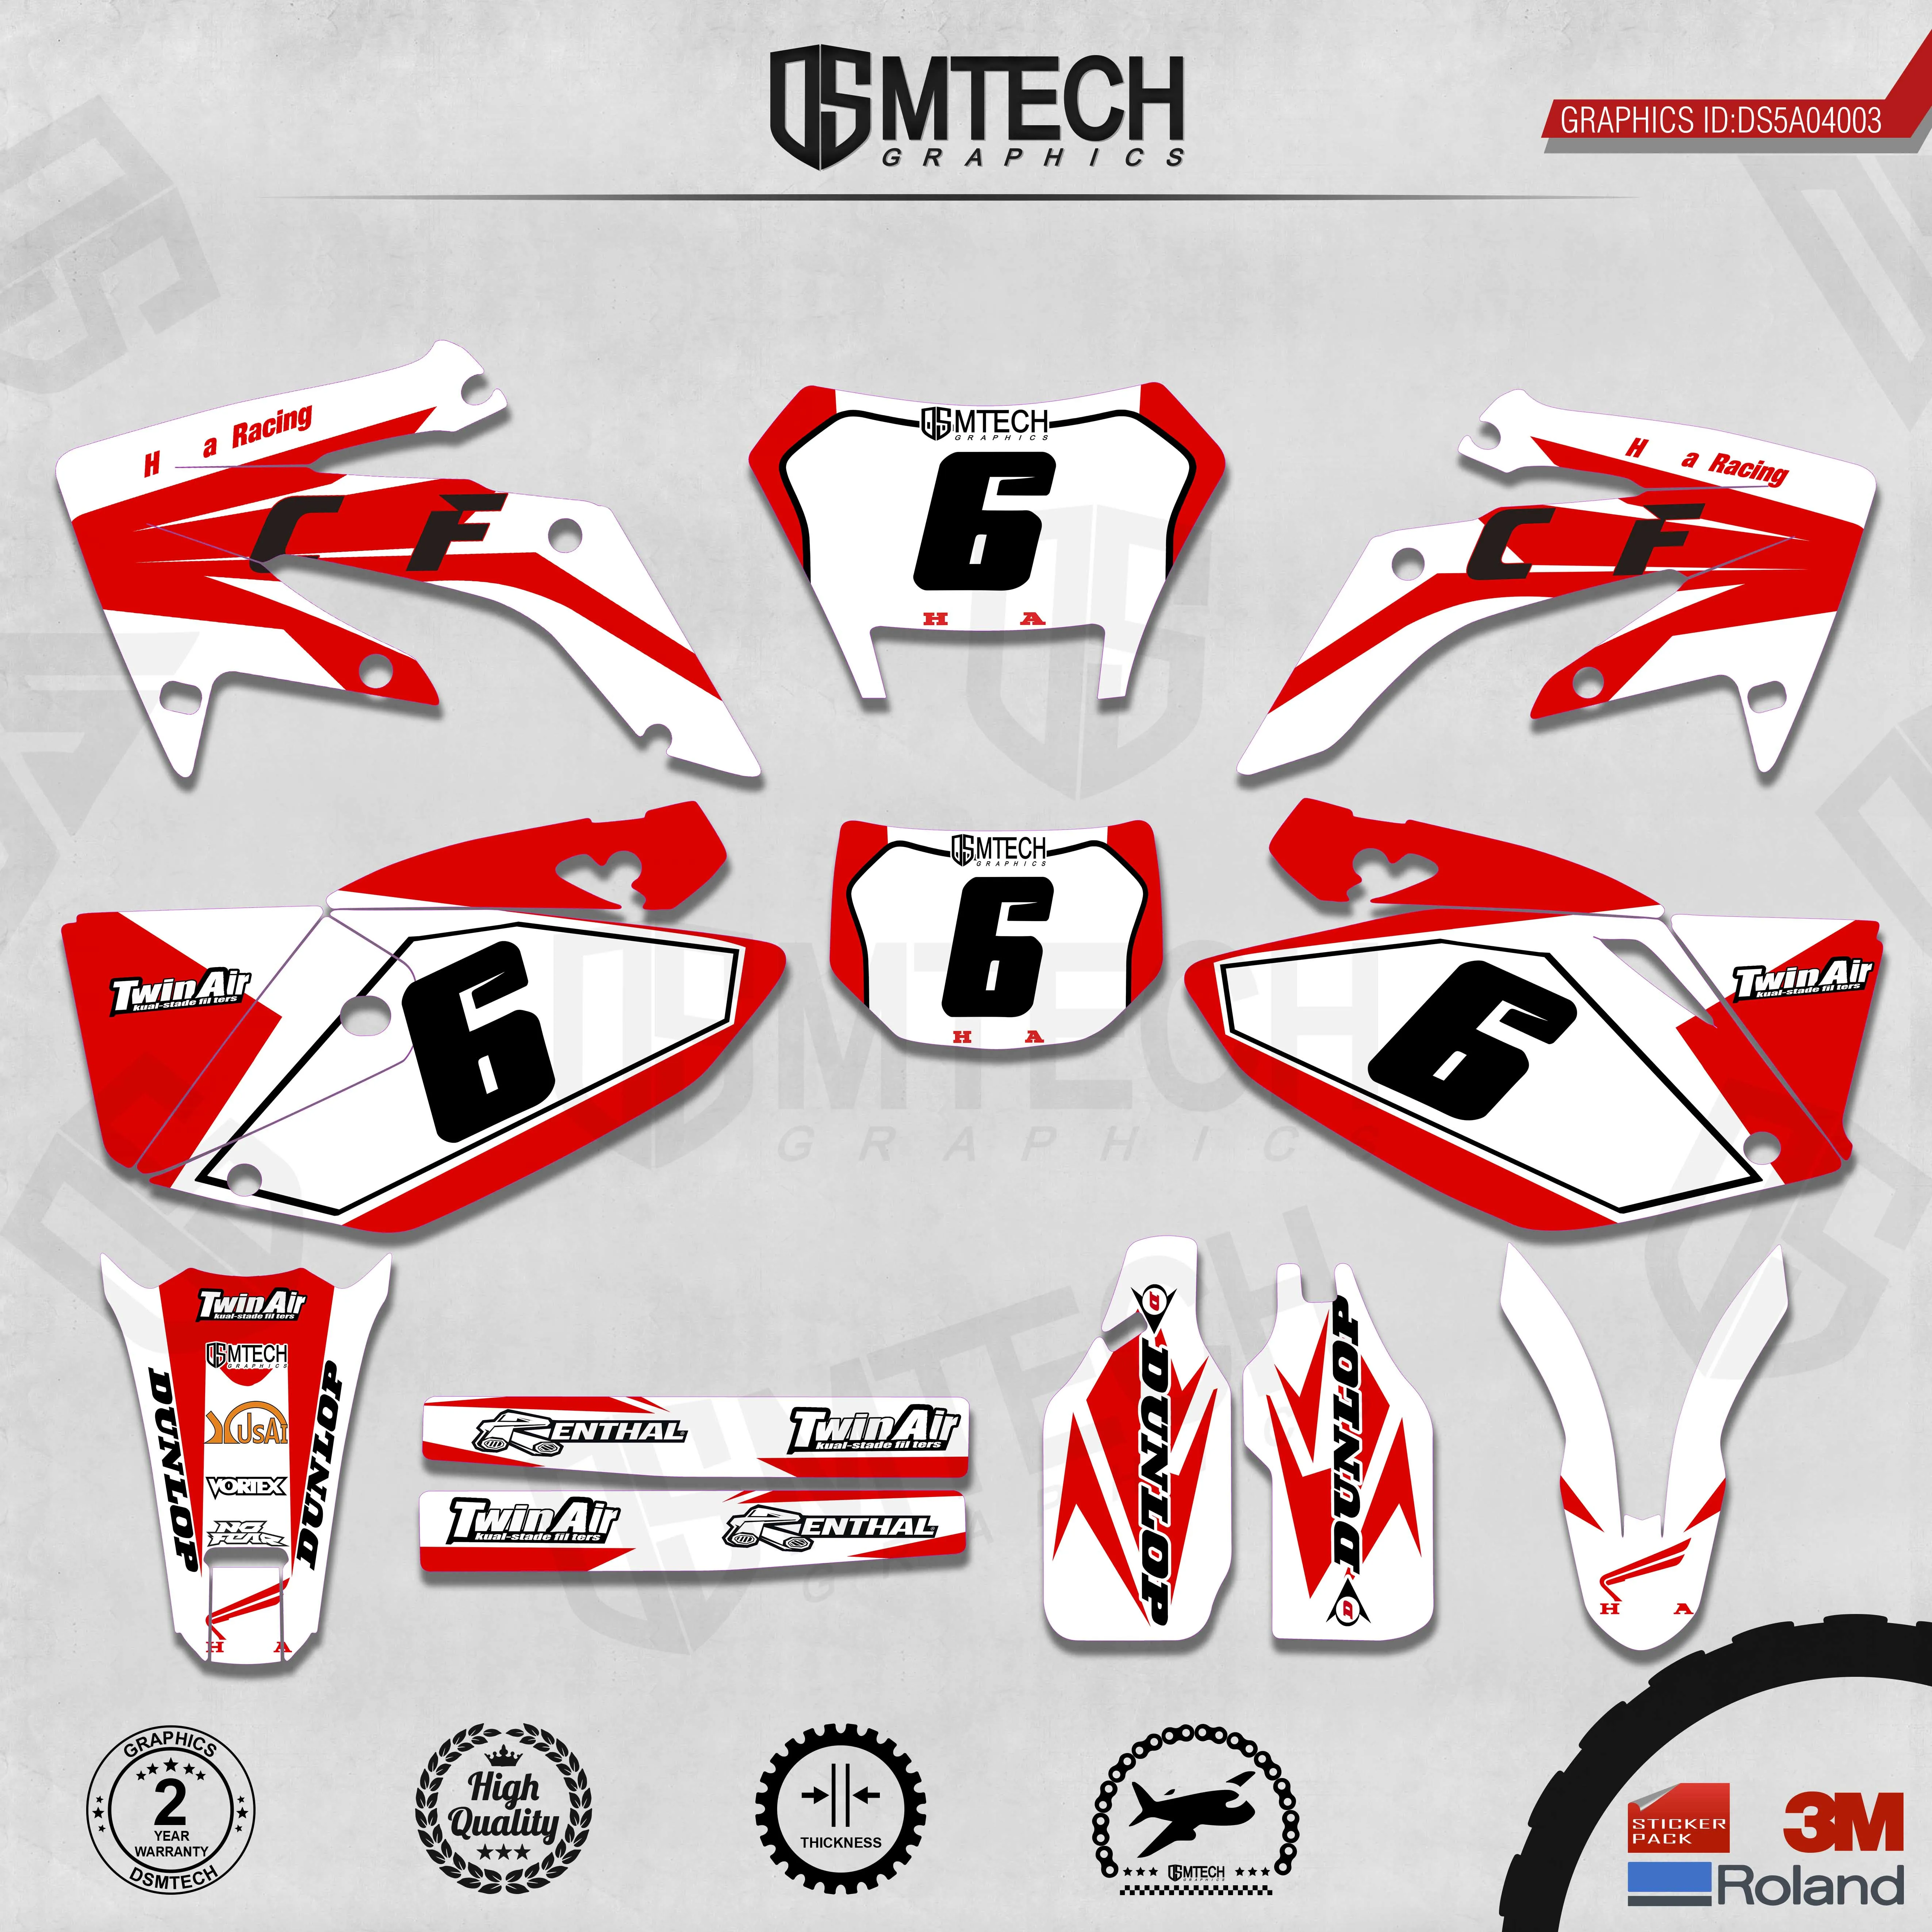 DSMTECH Customized Team Graphics Backgrounds Decals 3M Custom Stickers For 2004-2007 2008-2011 2012-2015 2016-2019 CRF250X 003